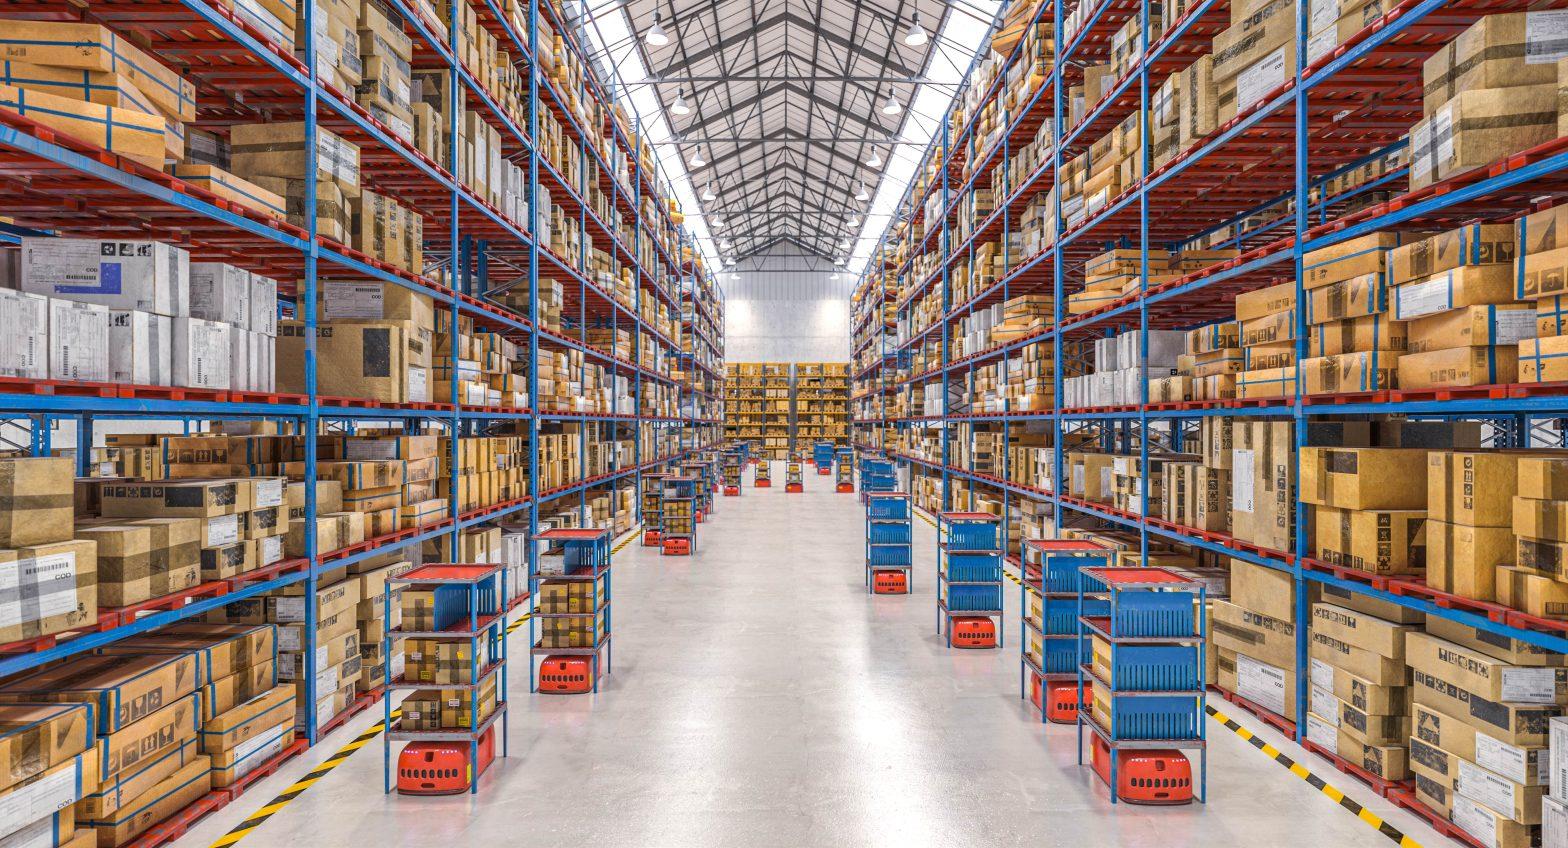 Benefits of warehouse commercial real estate investments